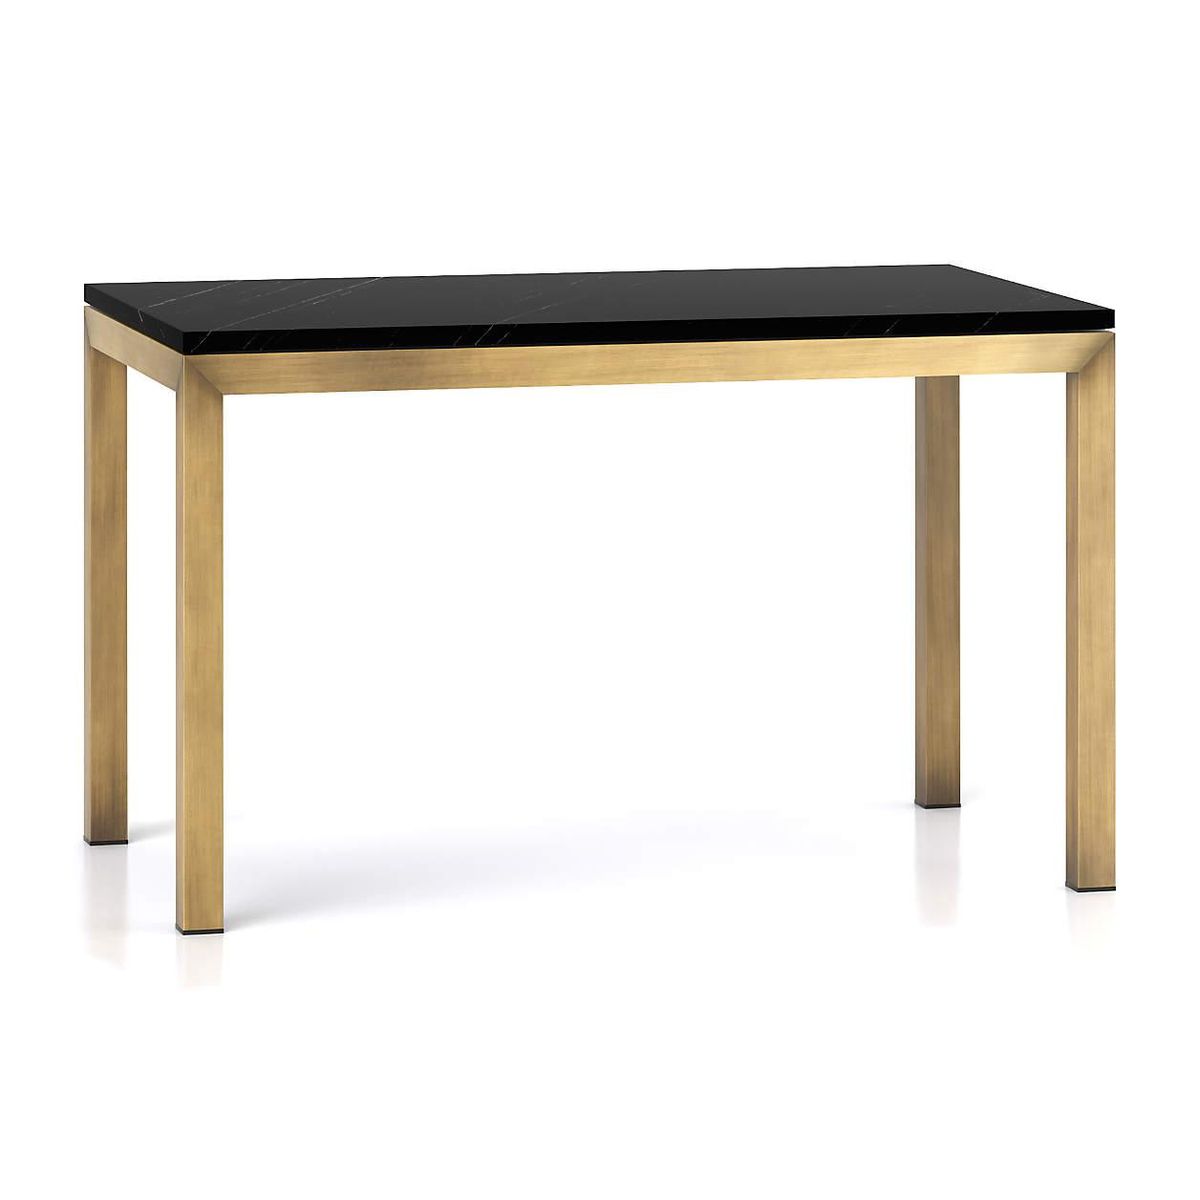 crate and barrel parsons black marble top brass base dining table